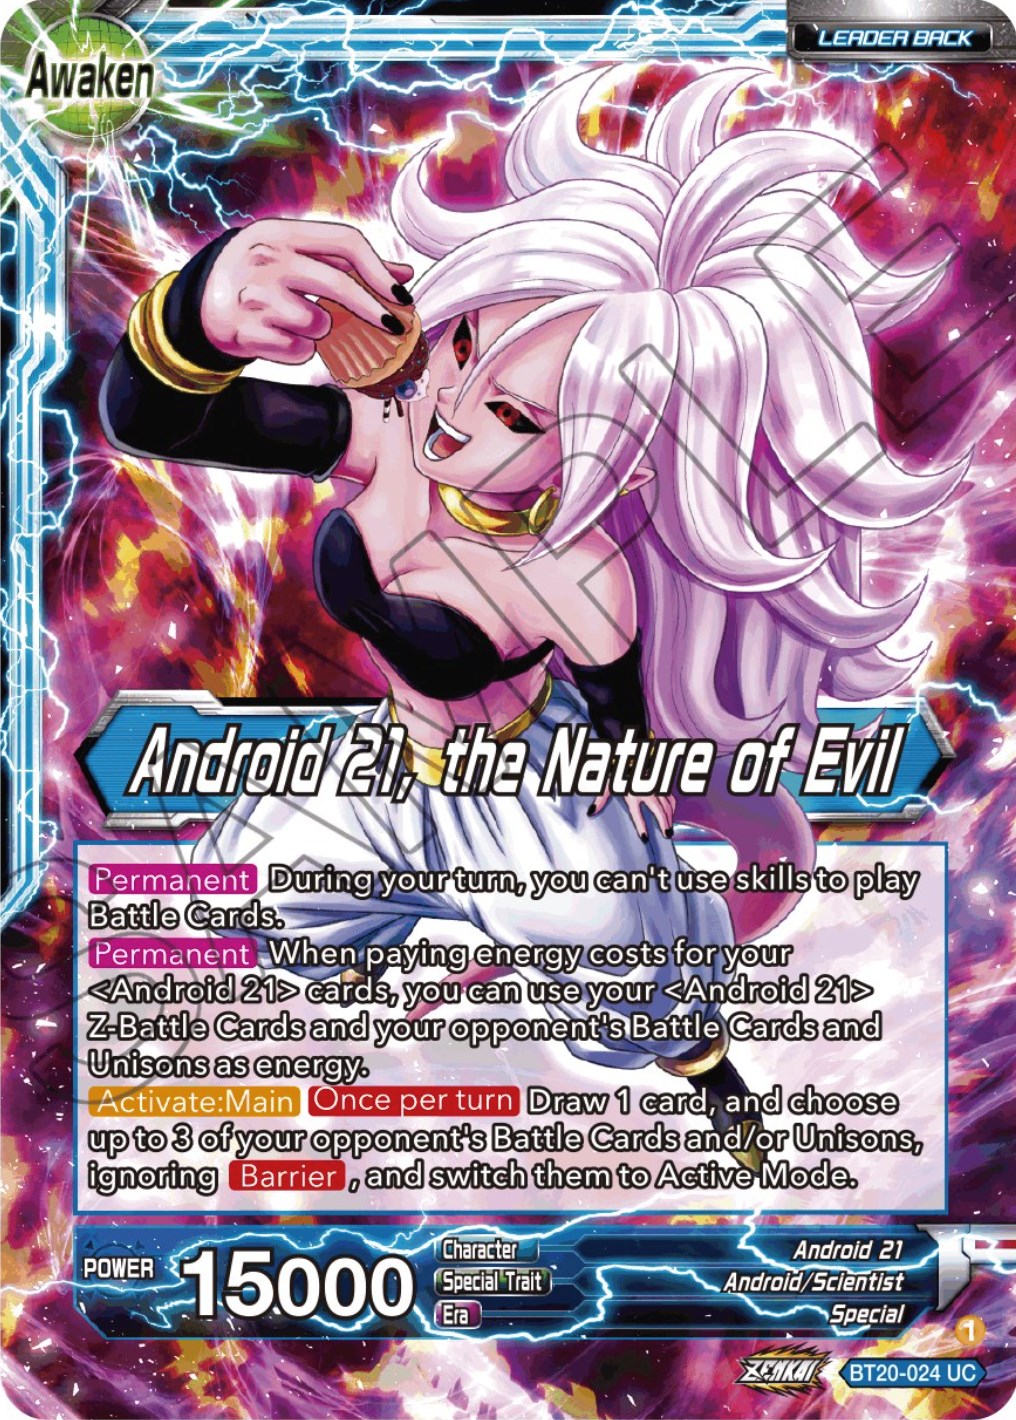 Android 21 // Android 21, the Nature of Evil - Power Absorbed